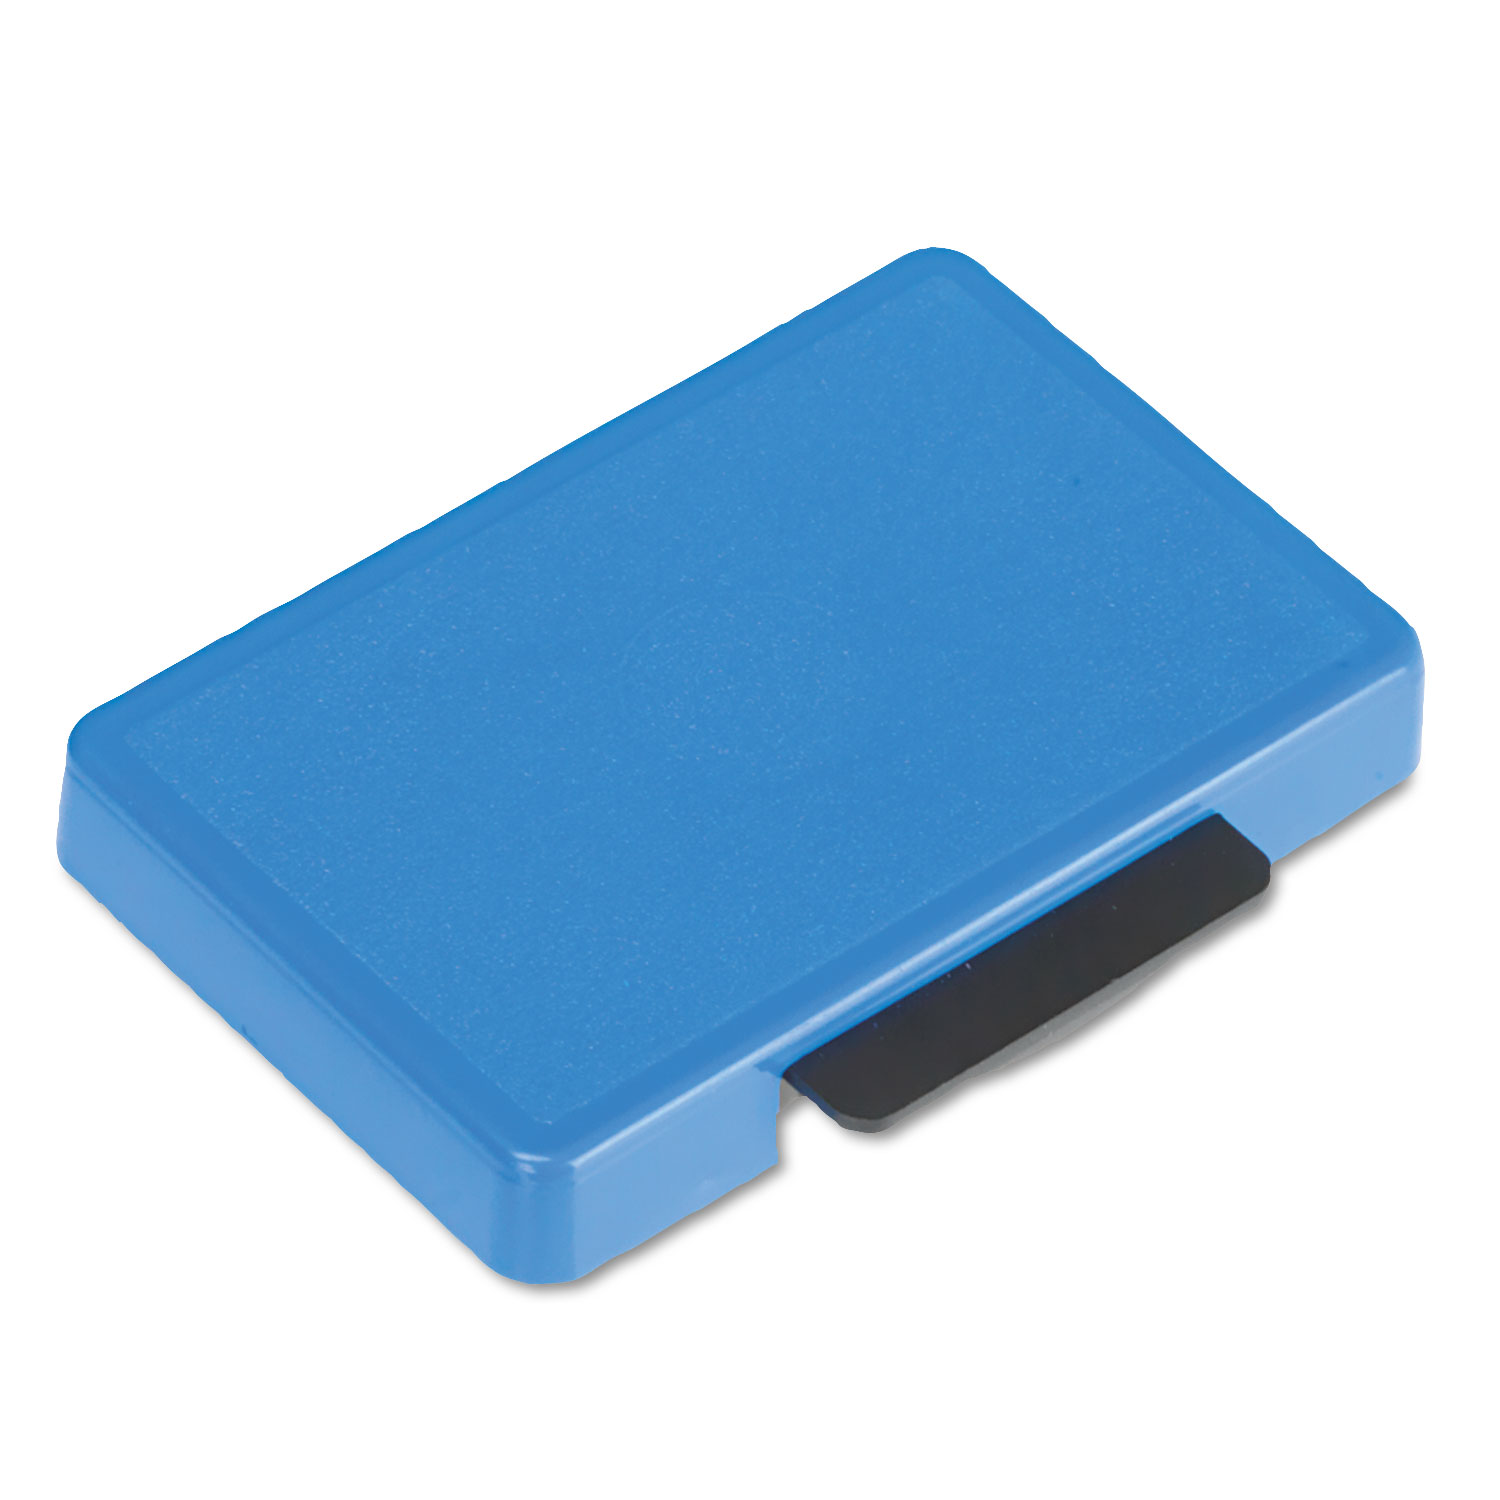  Identity Group P5440BL T5440 Dater Replacement Ink Pad, 1 1/8 x 2, Blue (USSP5440BL) 